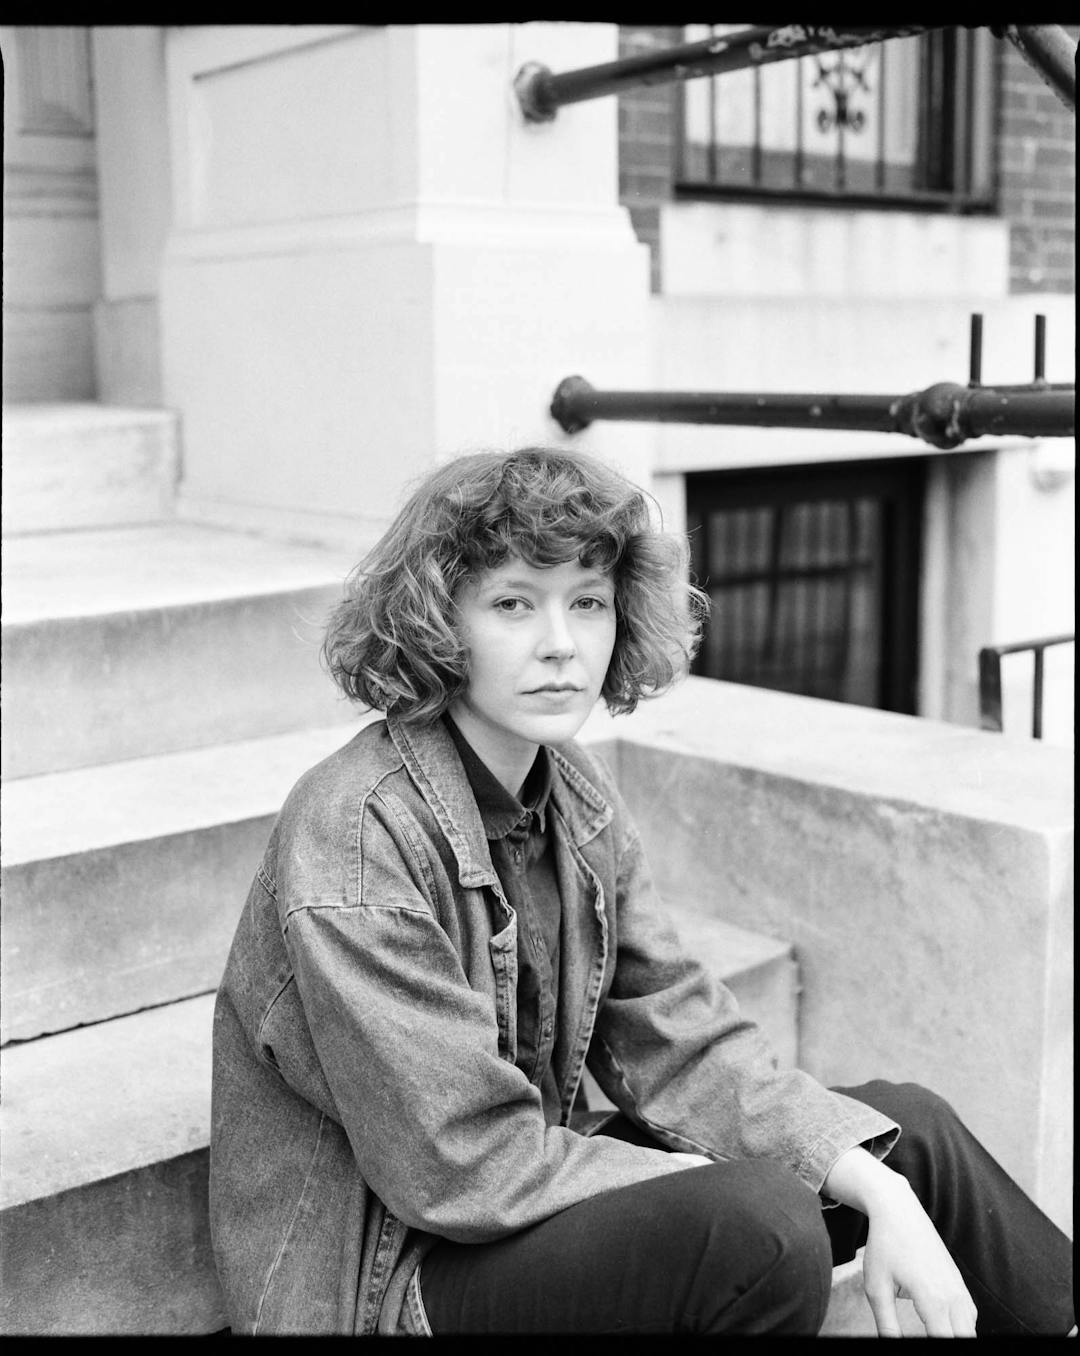 black and white medium format portrait of woman sitting outside on steps 